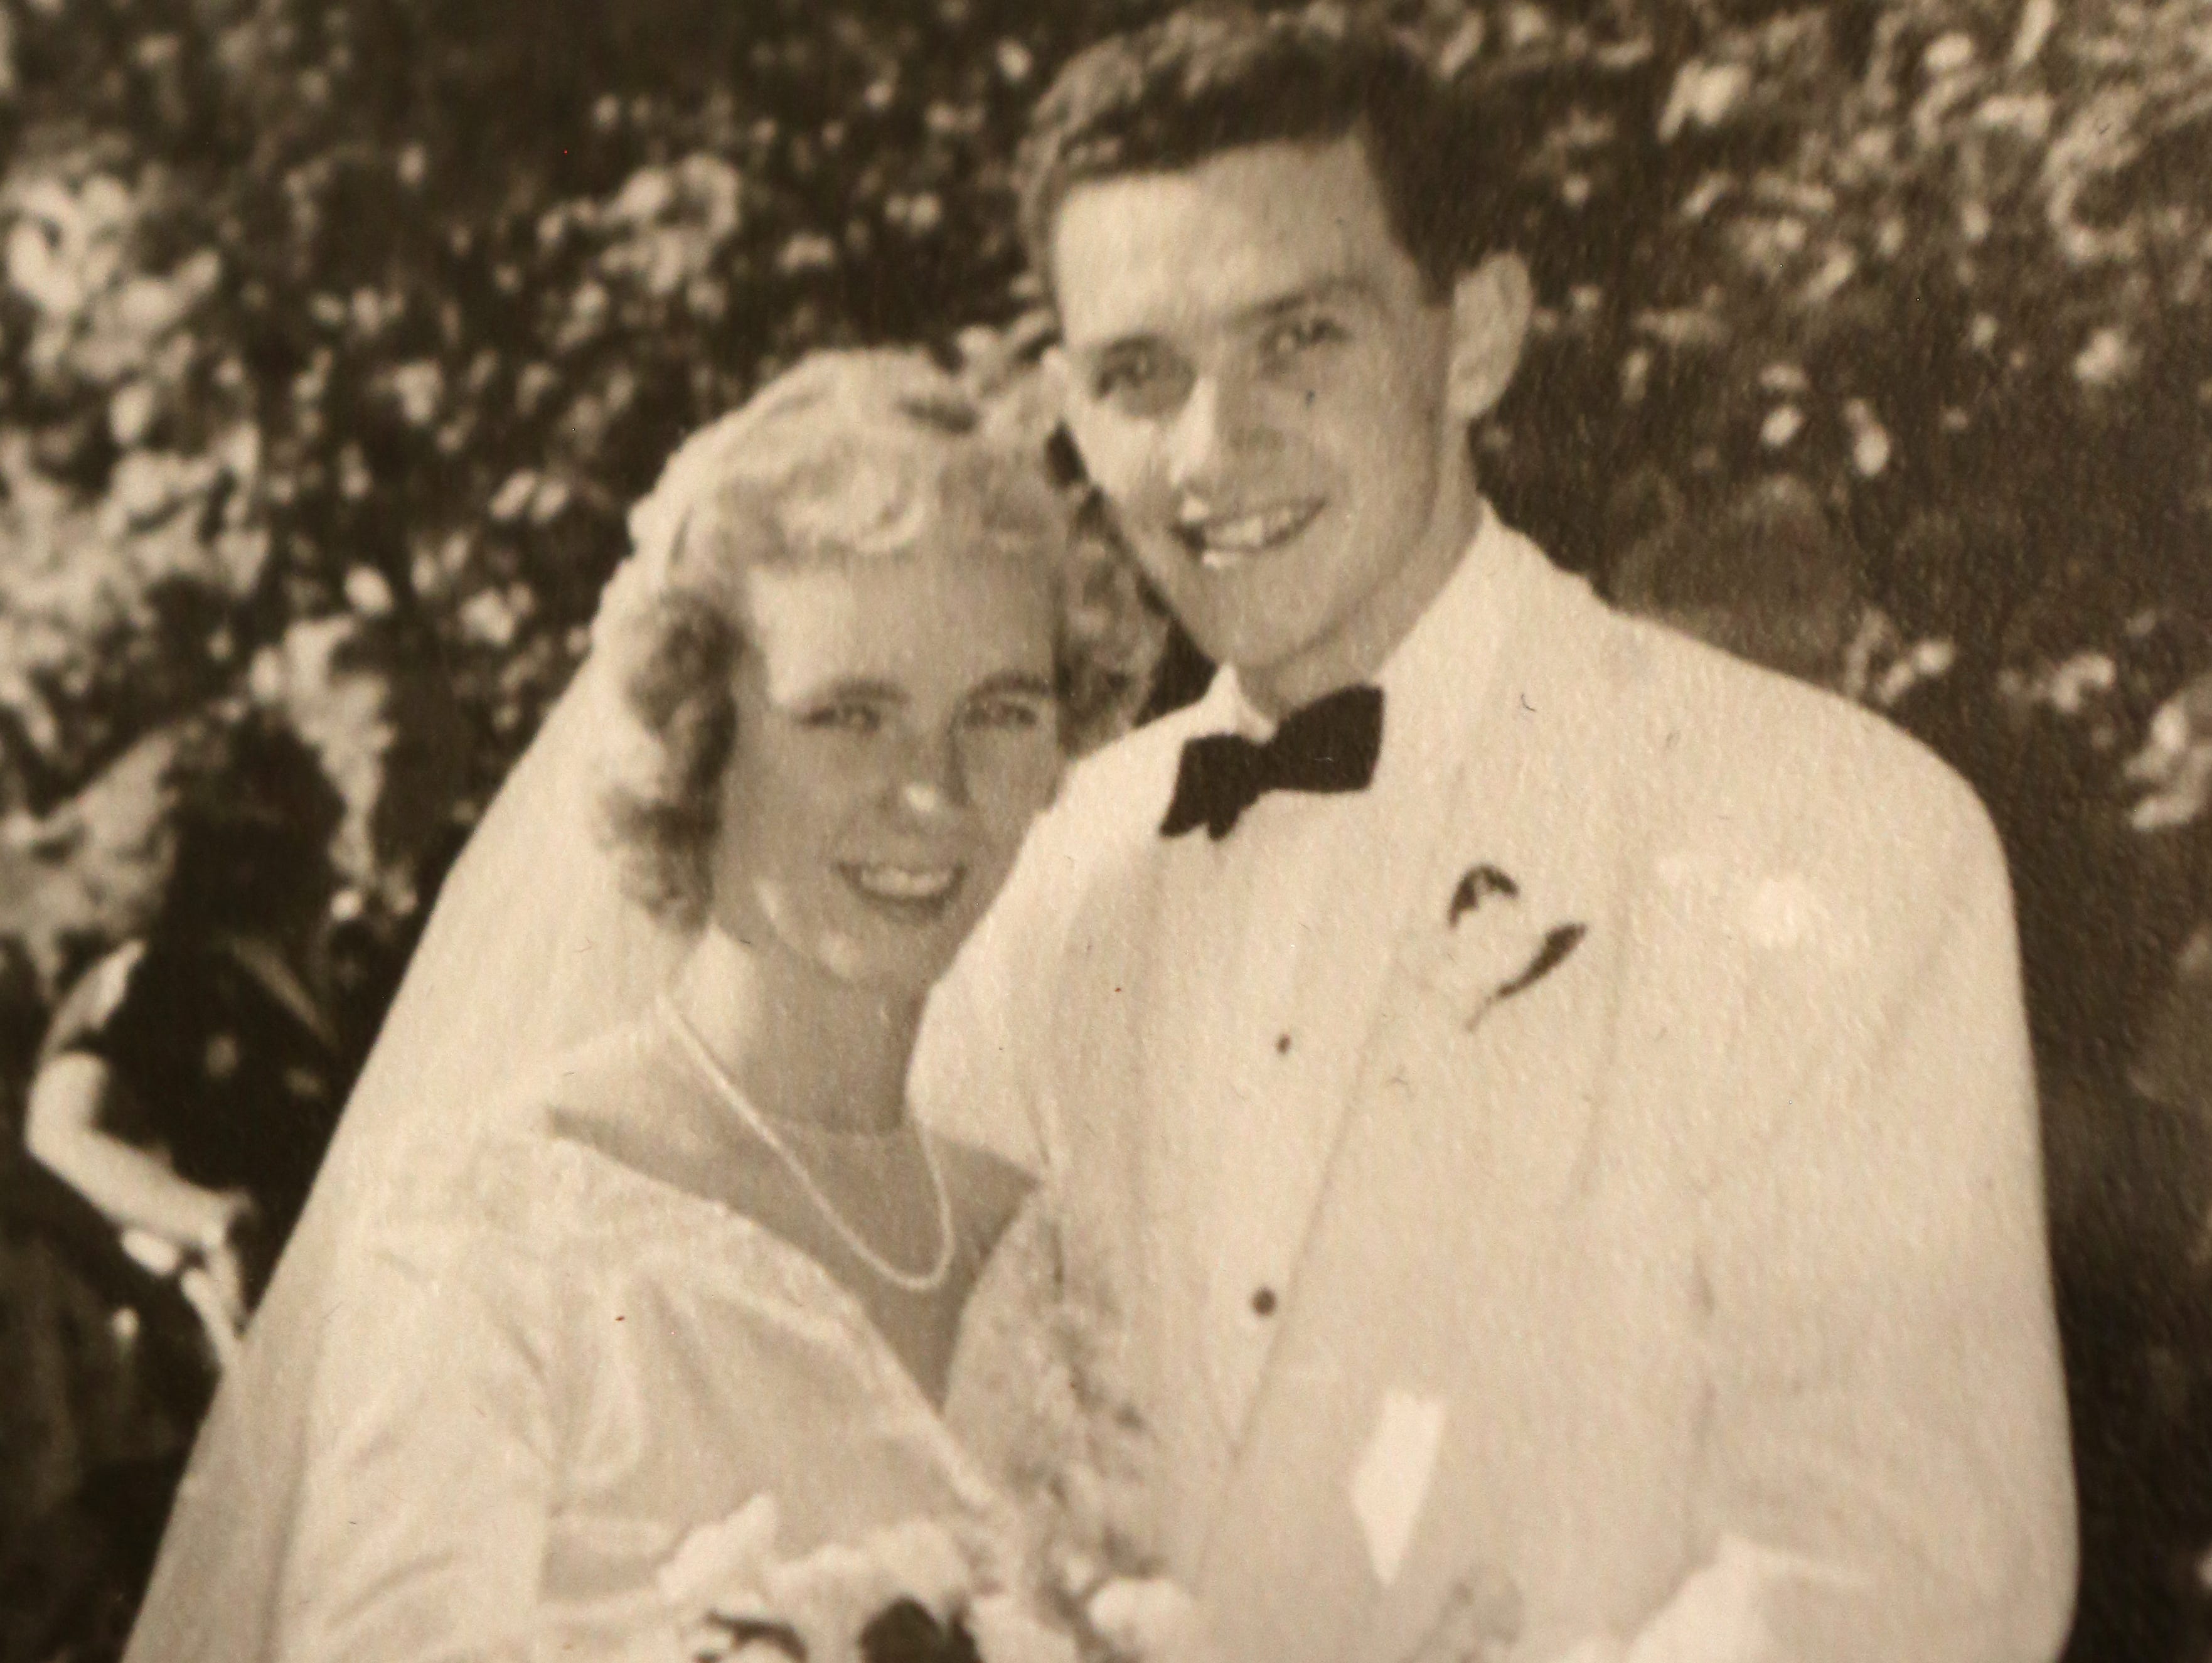 This is the wedding photo of Reverend Robert “Bob” Denny, and his bride, Betty, of White Oak.